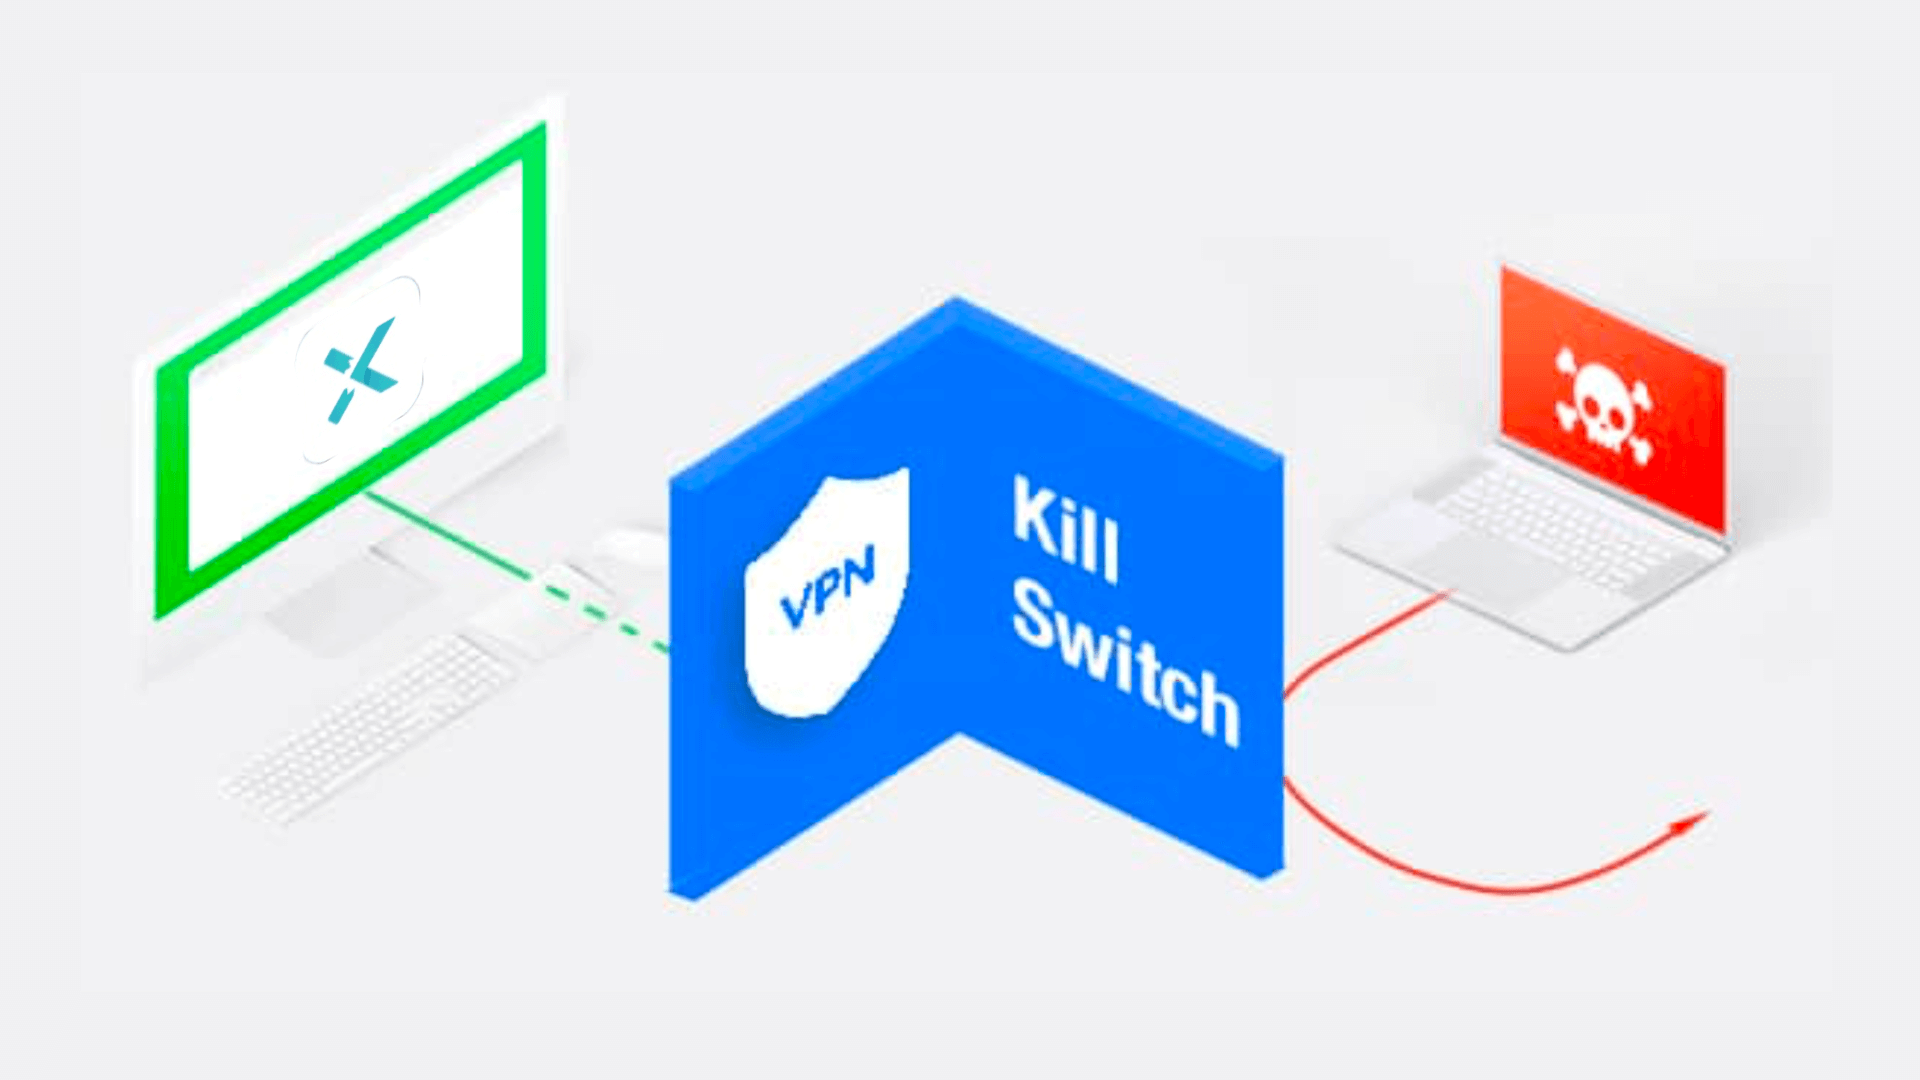 What is a VPN kill switch